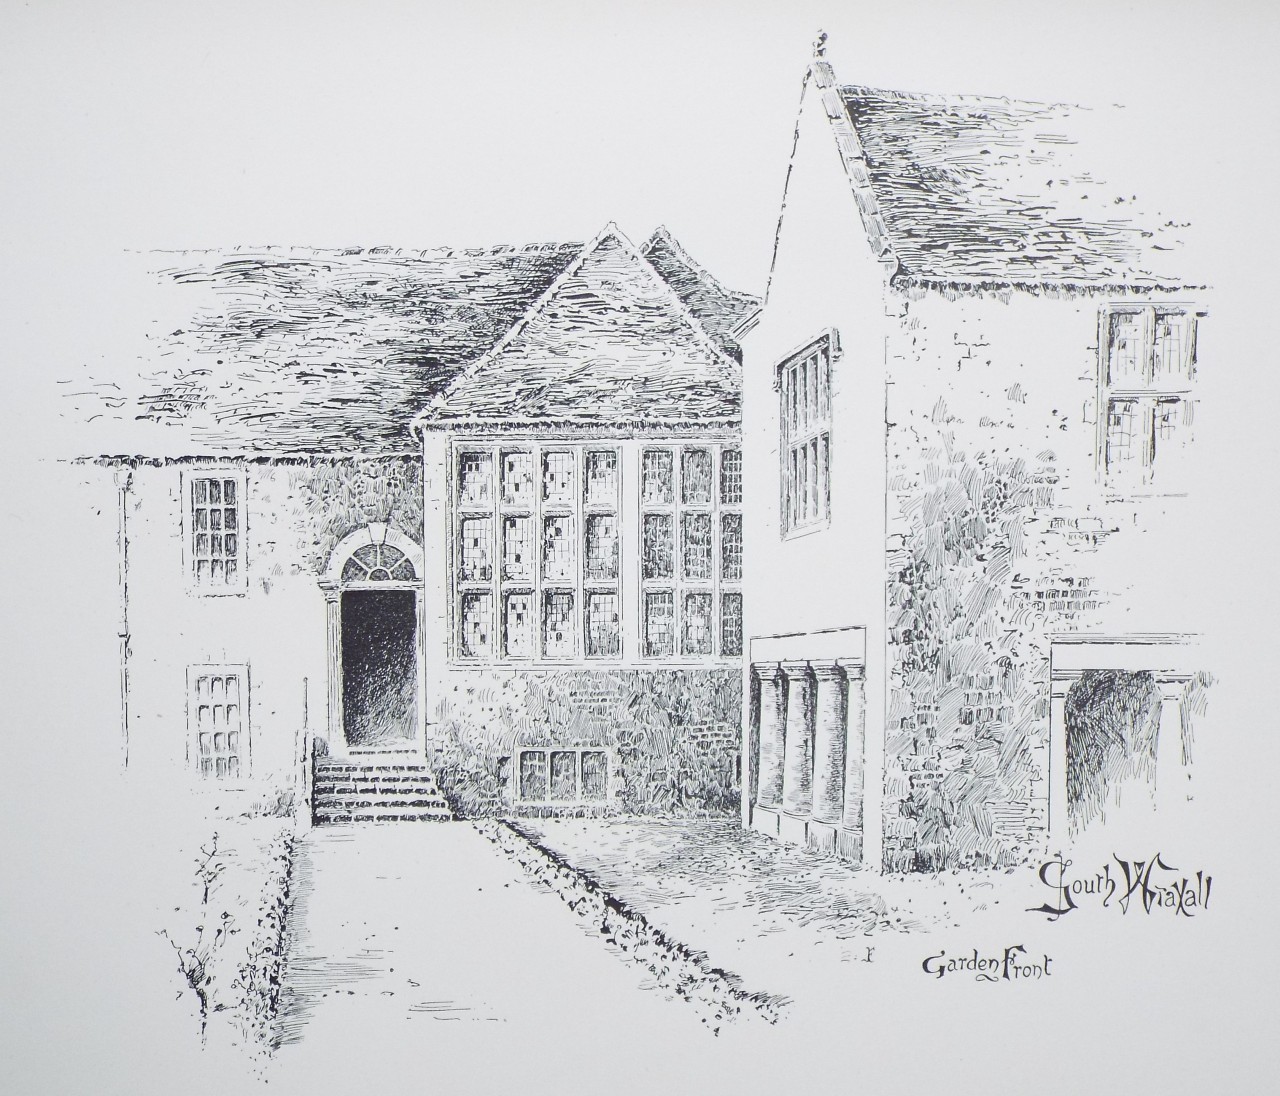 Lithograph - South Wraxhall Garden Front